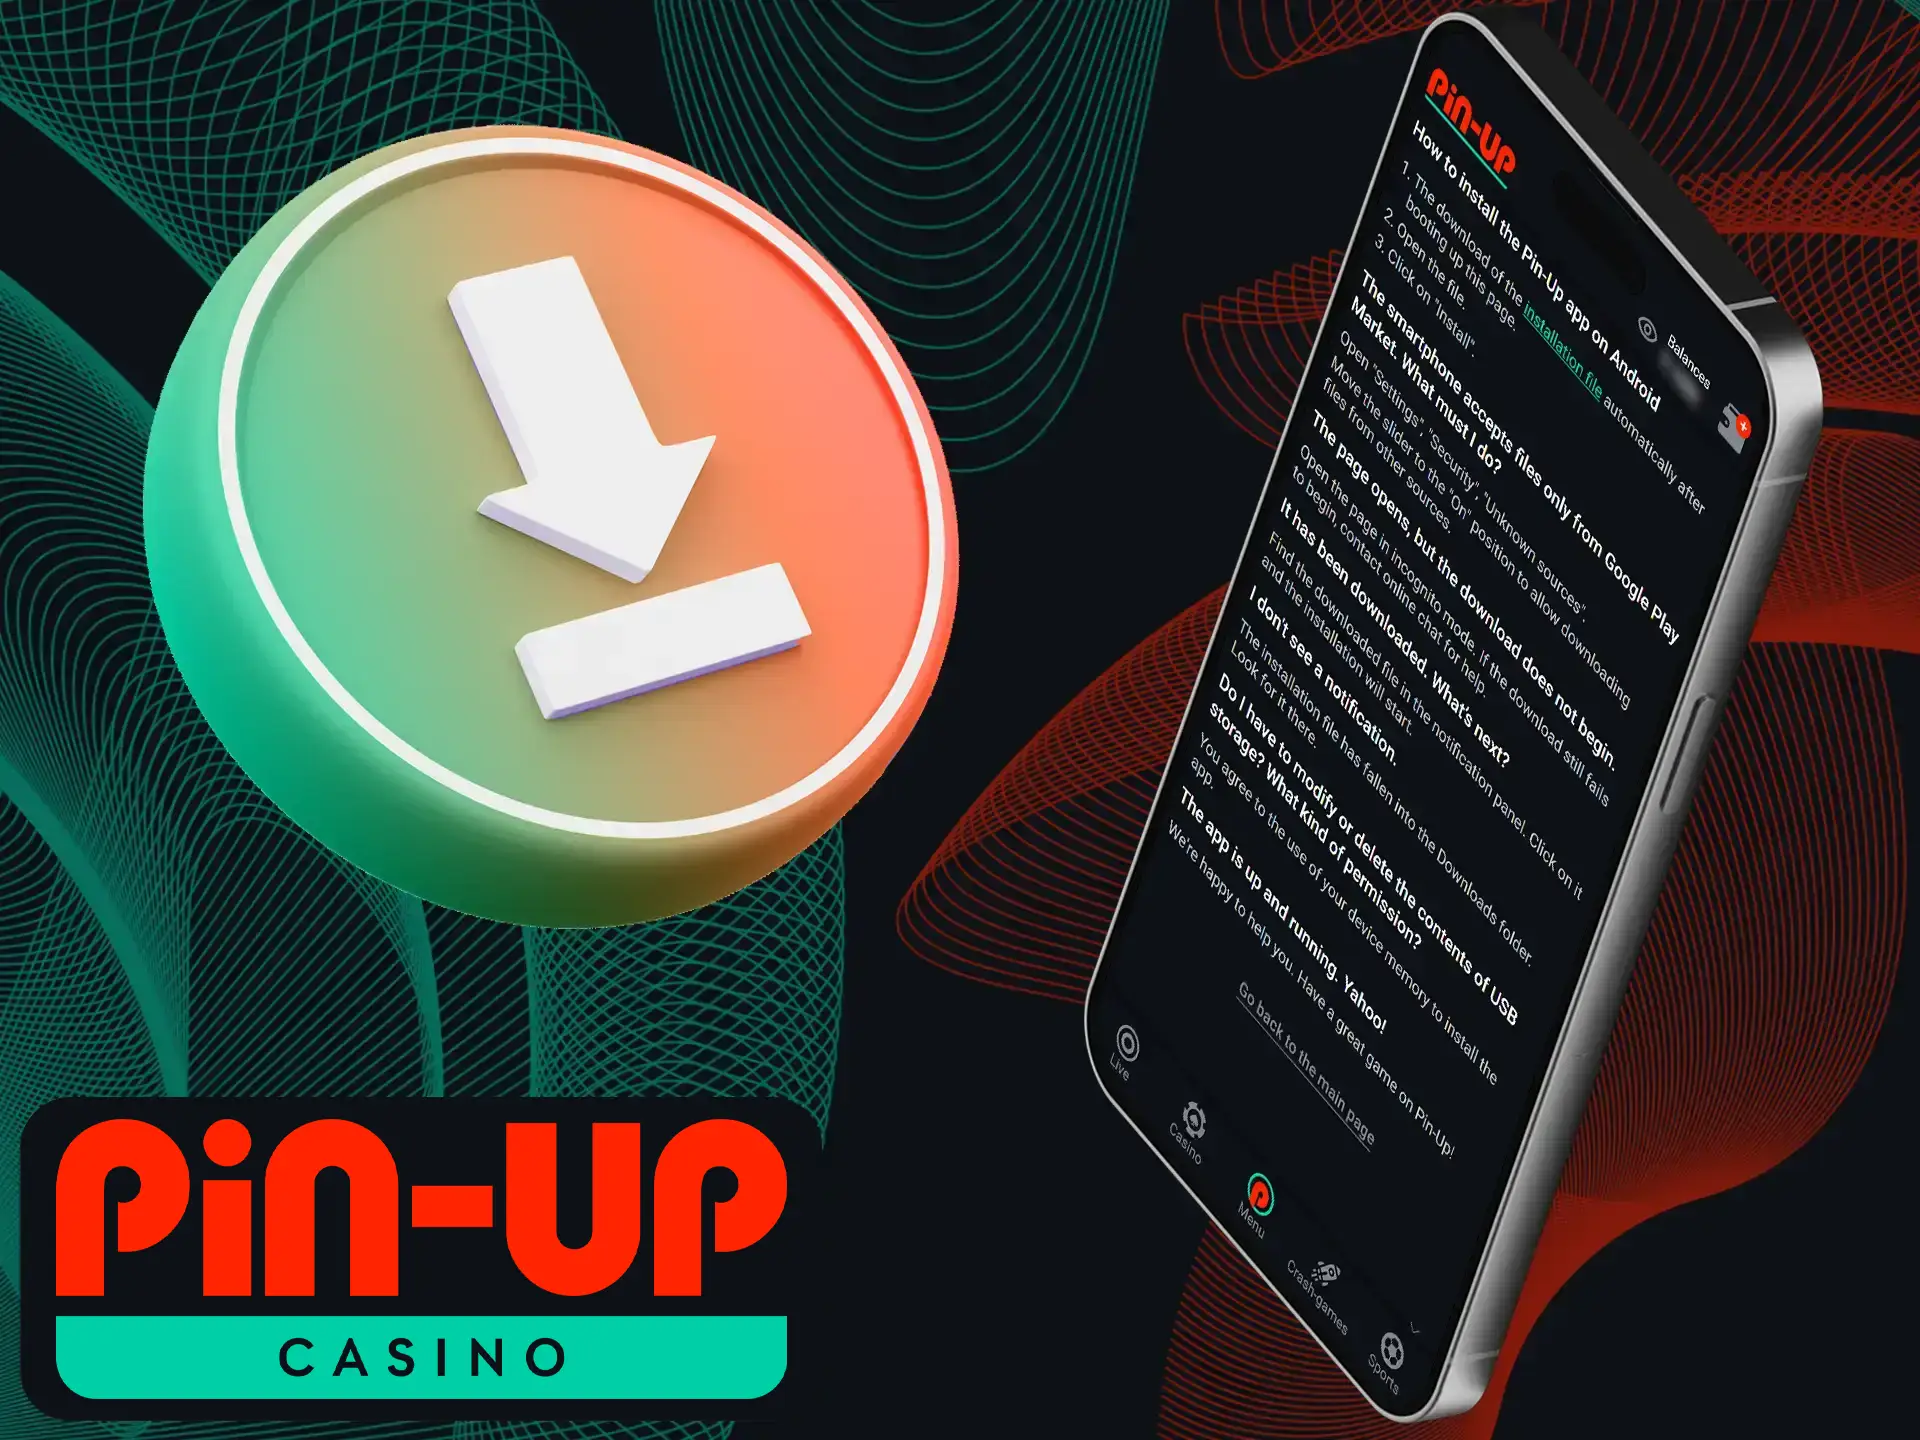 The Pin-Up app conveniently notifies you when new versions are available for a smooth playing experience, and that way you can always update the Pin-Up app on your smartphone.